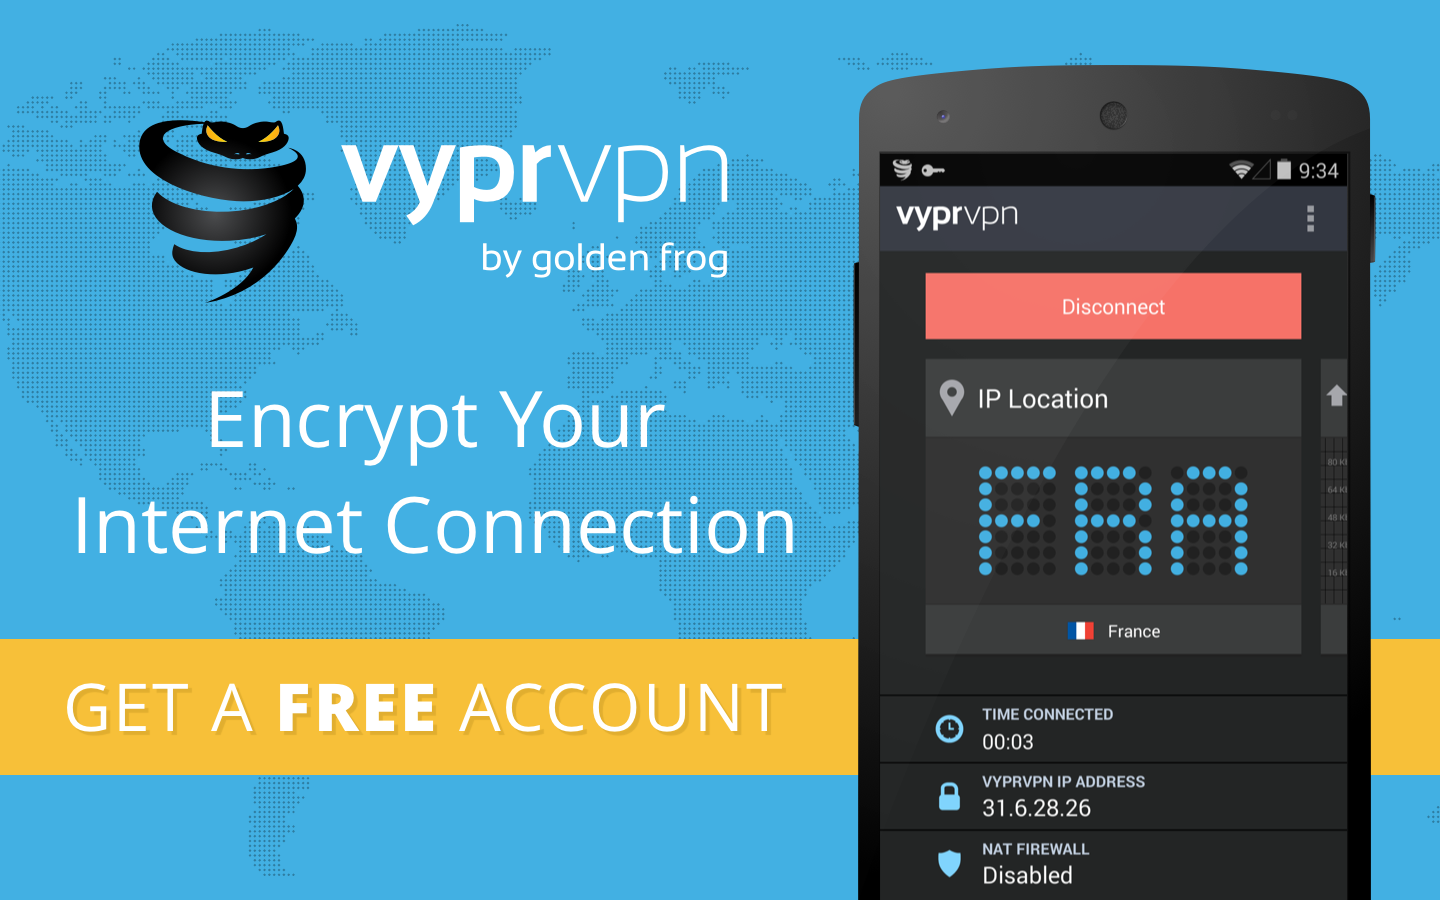 best vpn servers for android